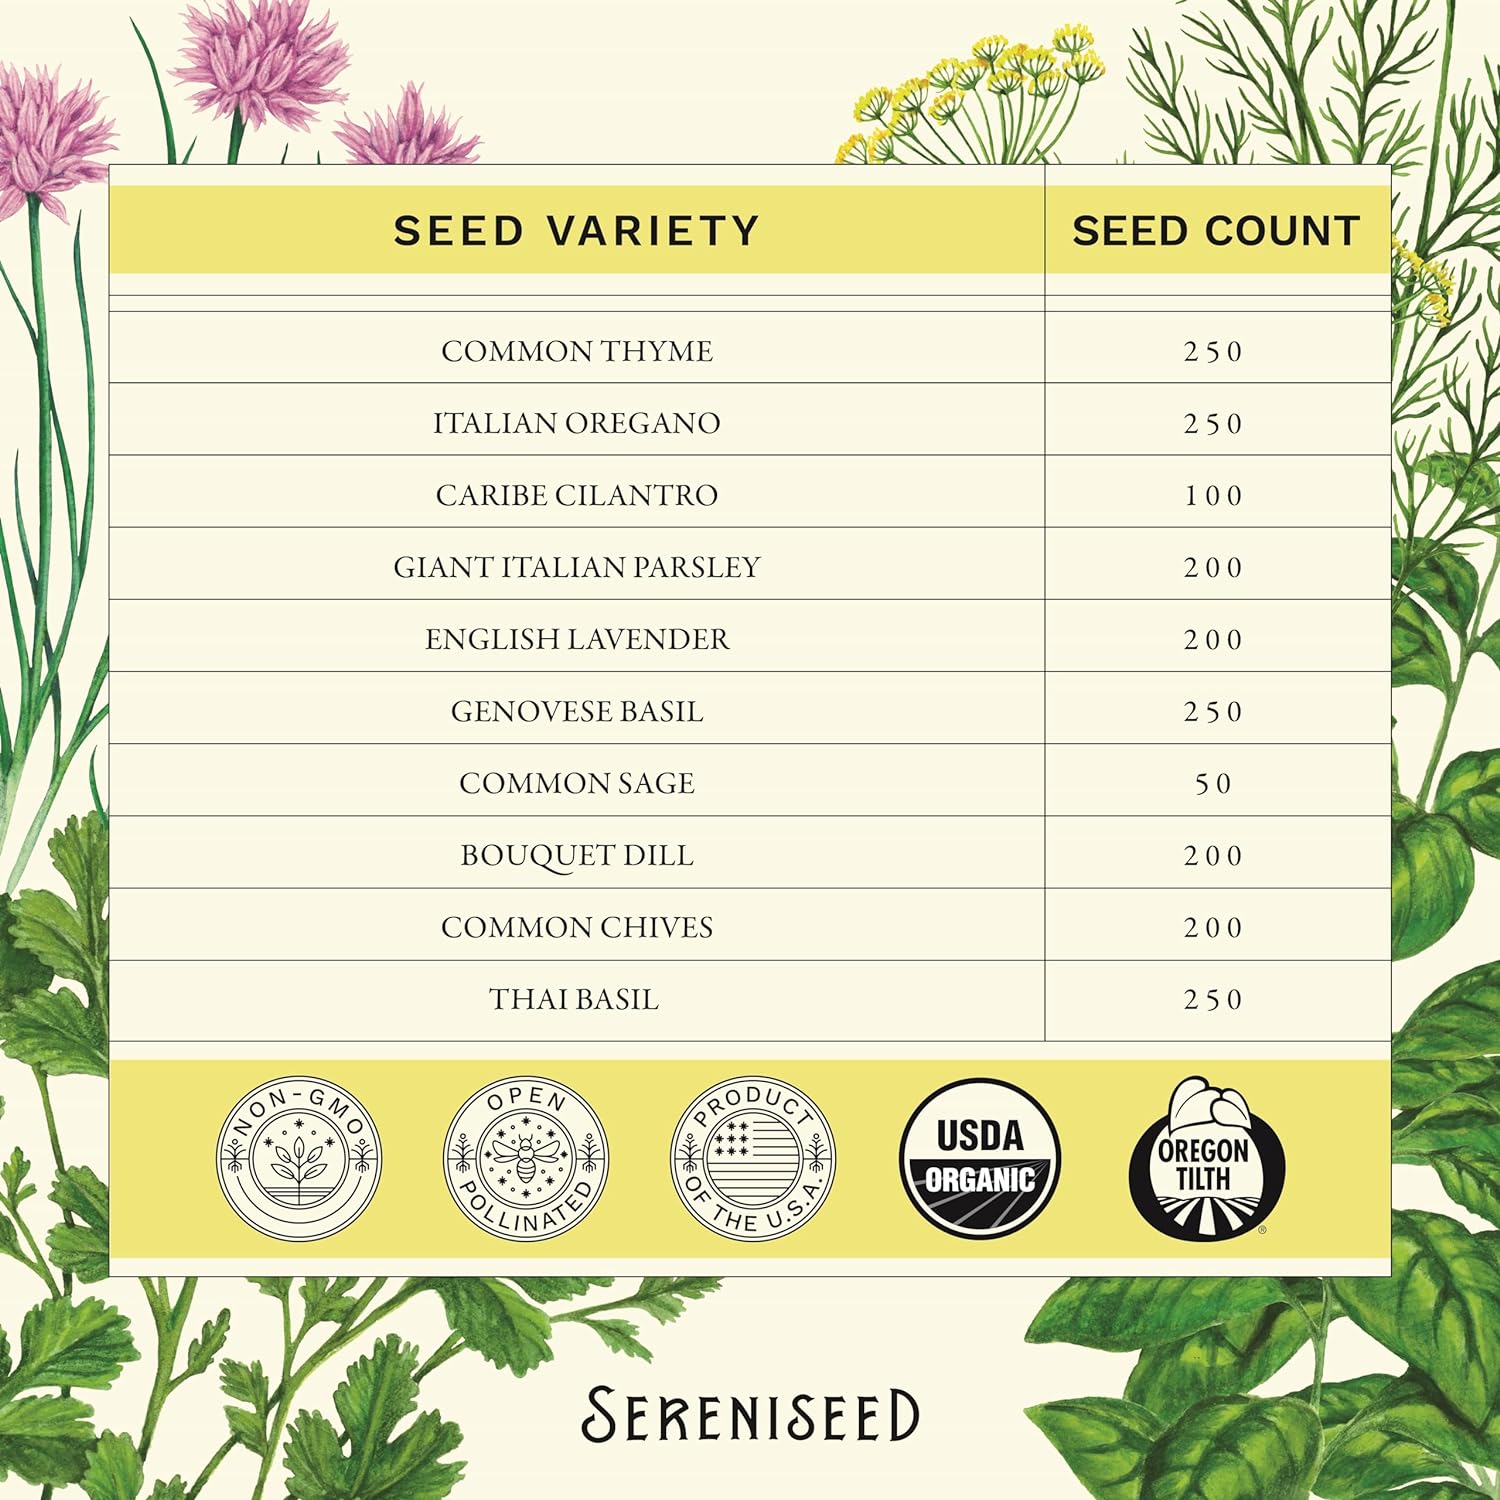 Certified Organic Herb Seeds (10-Pack) – Non GMO, Heirloom – Seed Starting Video - Basil, Cilantro, Oregano, Thyme, Parsley, Lavender, Chives, Sage, Dill Seeds for Indoor & Outdoor Planting